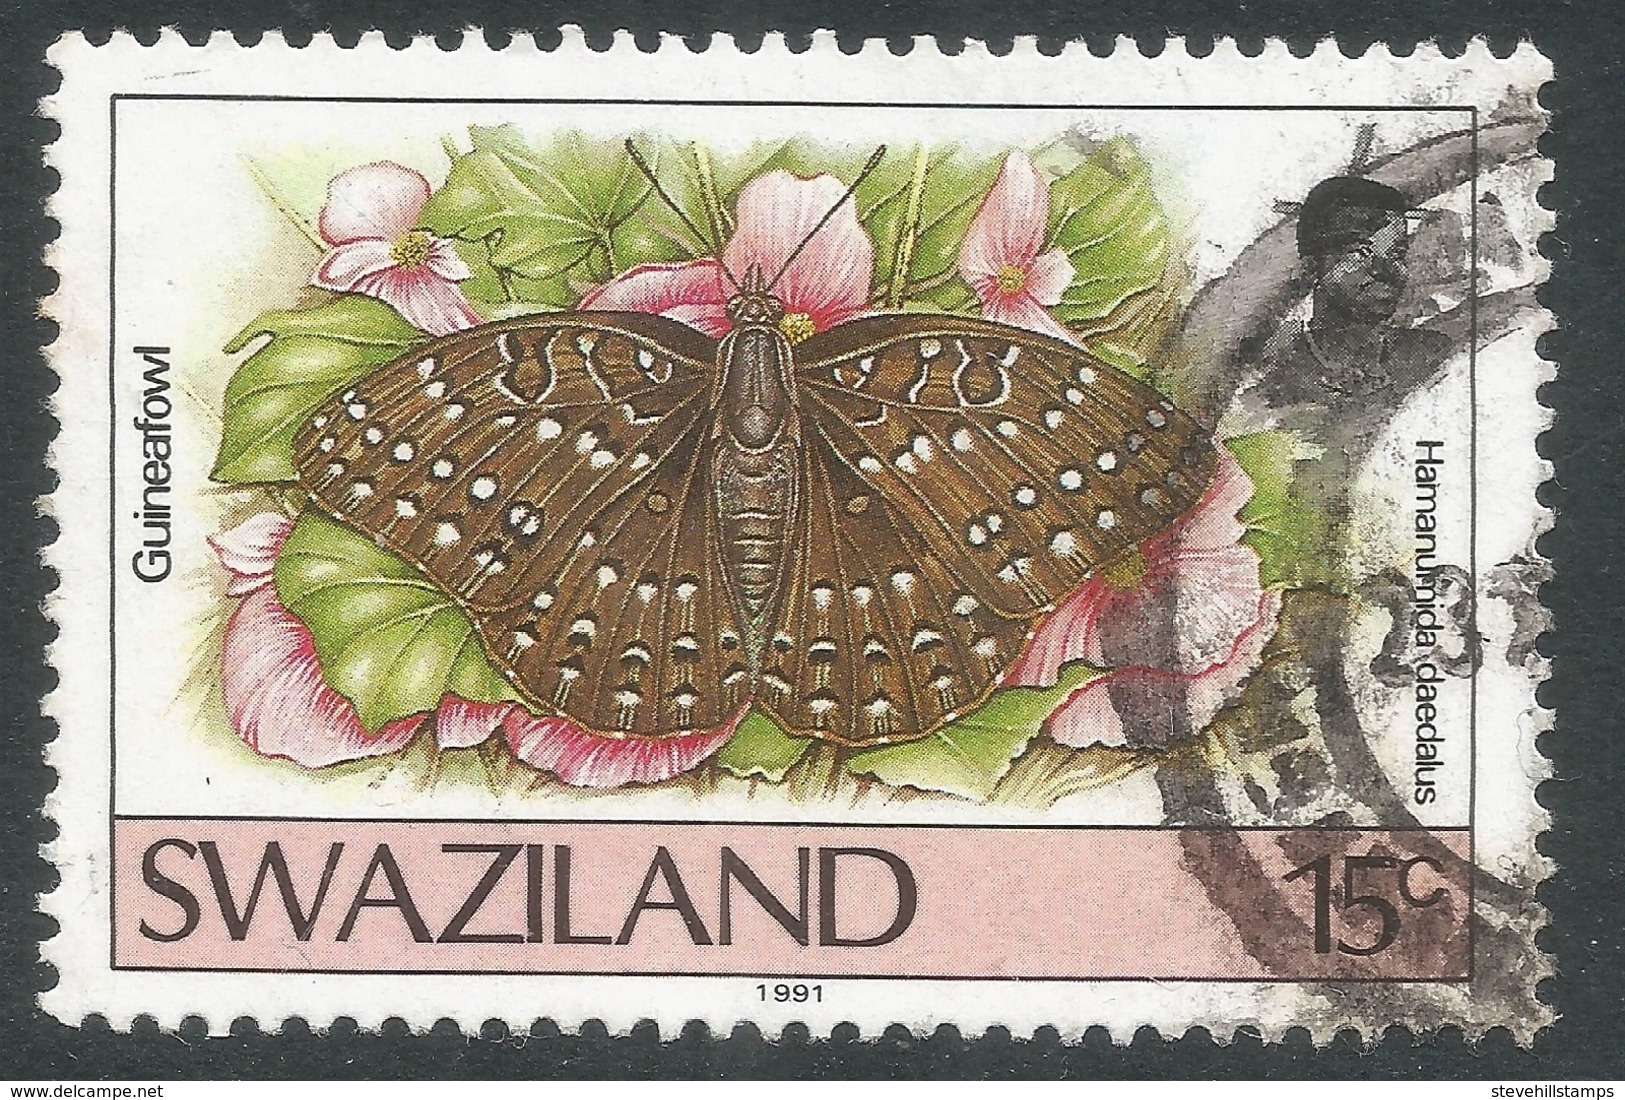 Swaziland. 1992 Butterflies (2nd Series). 15c Used. SG 608 - Swaziland (1968-...)